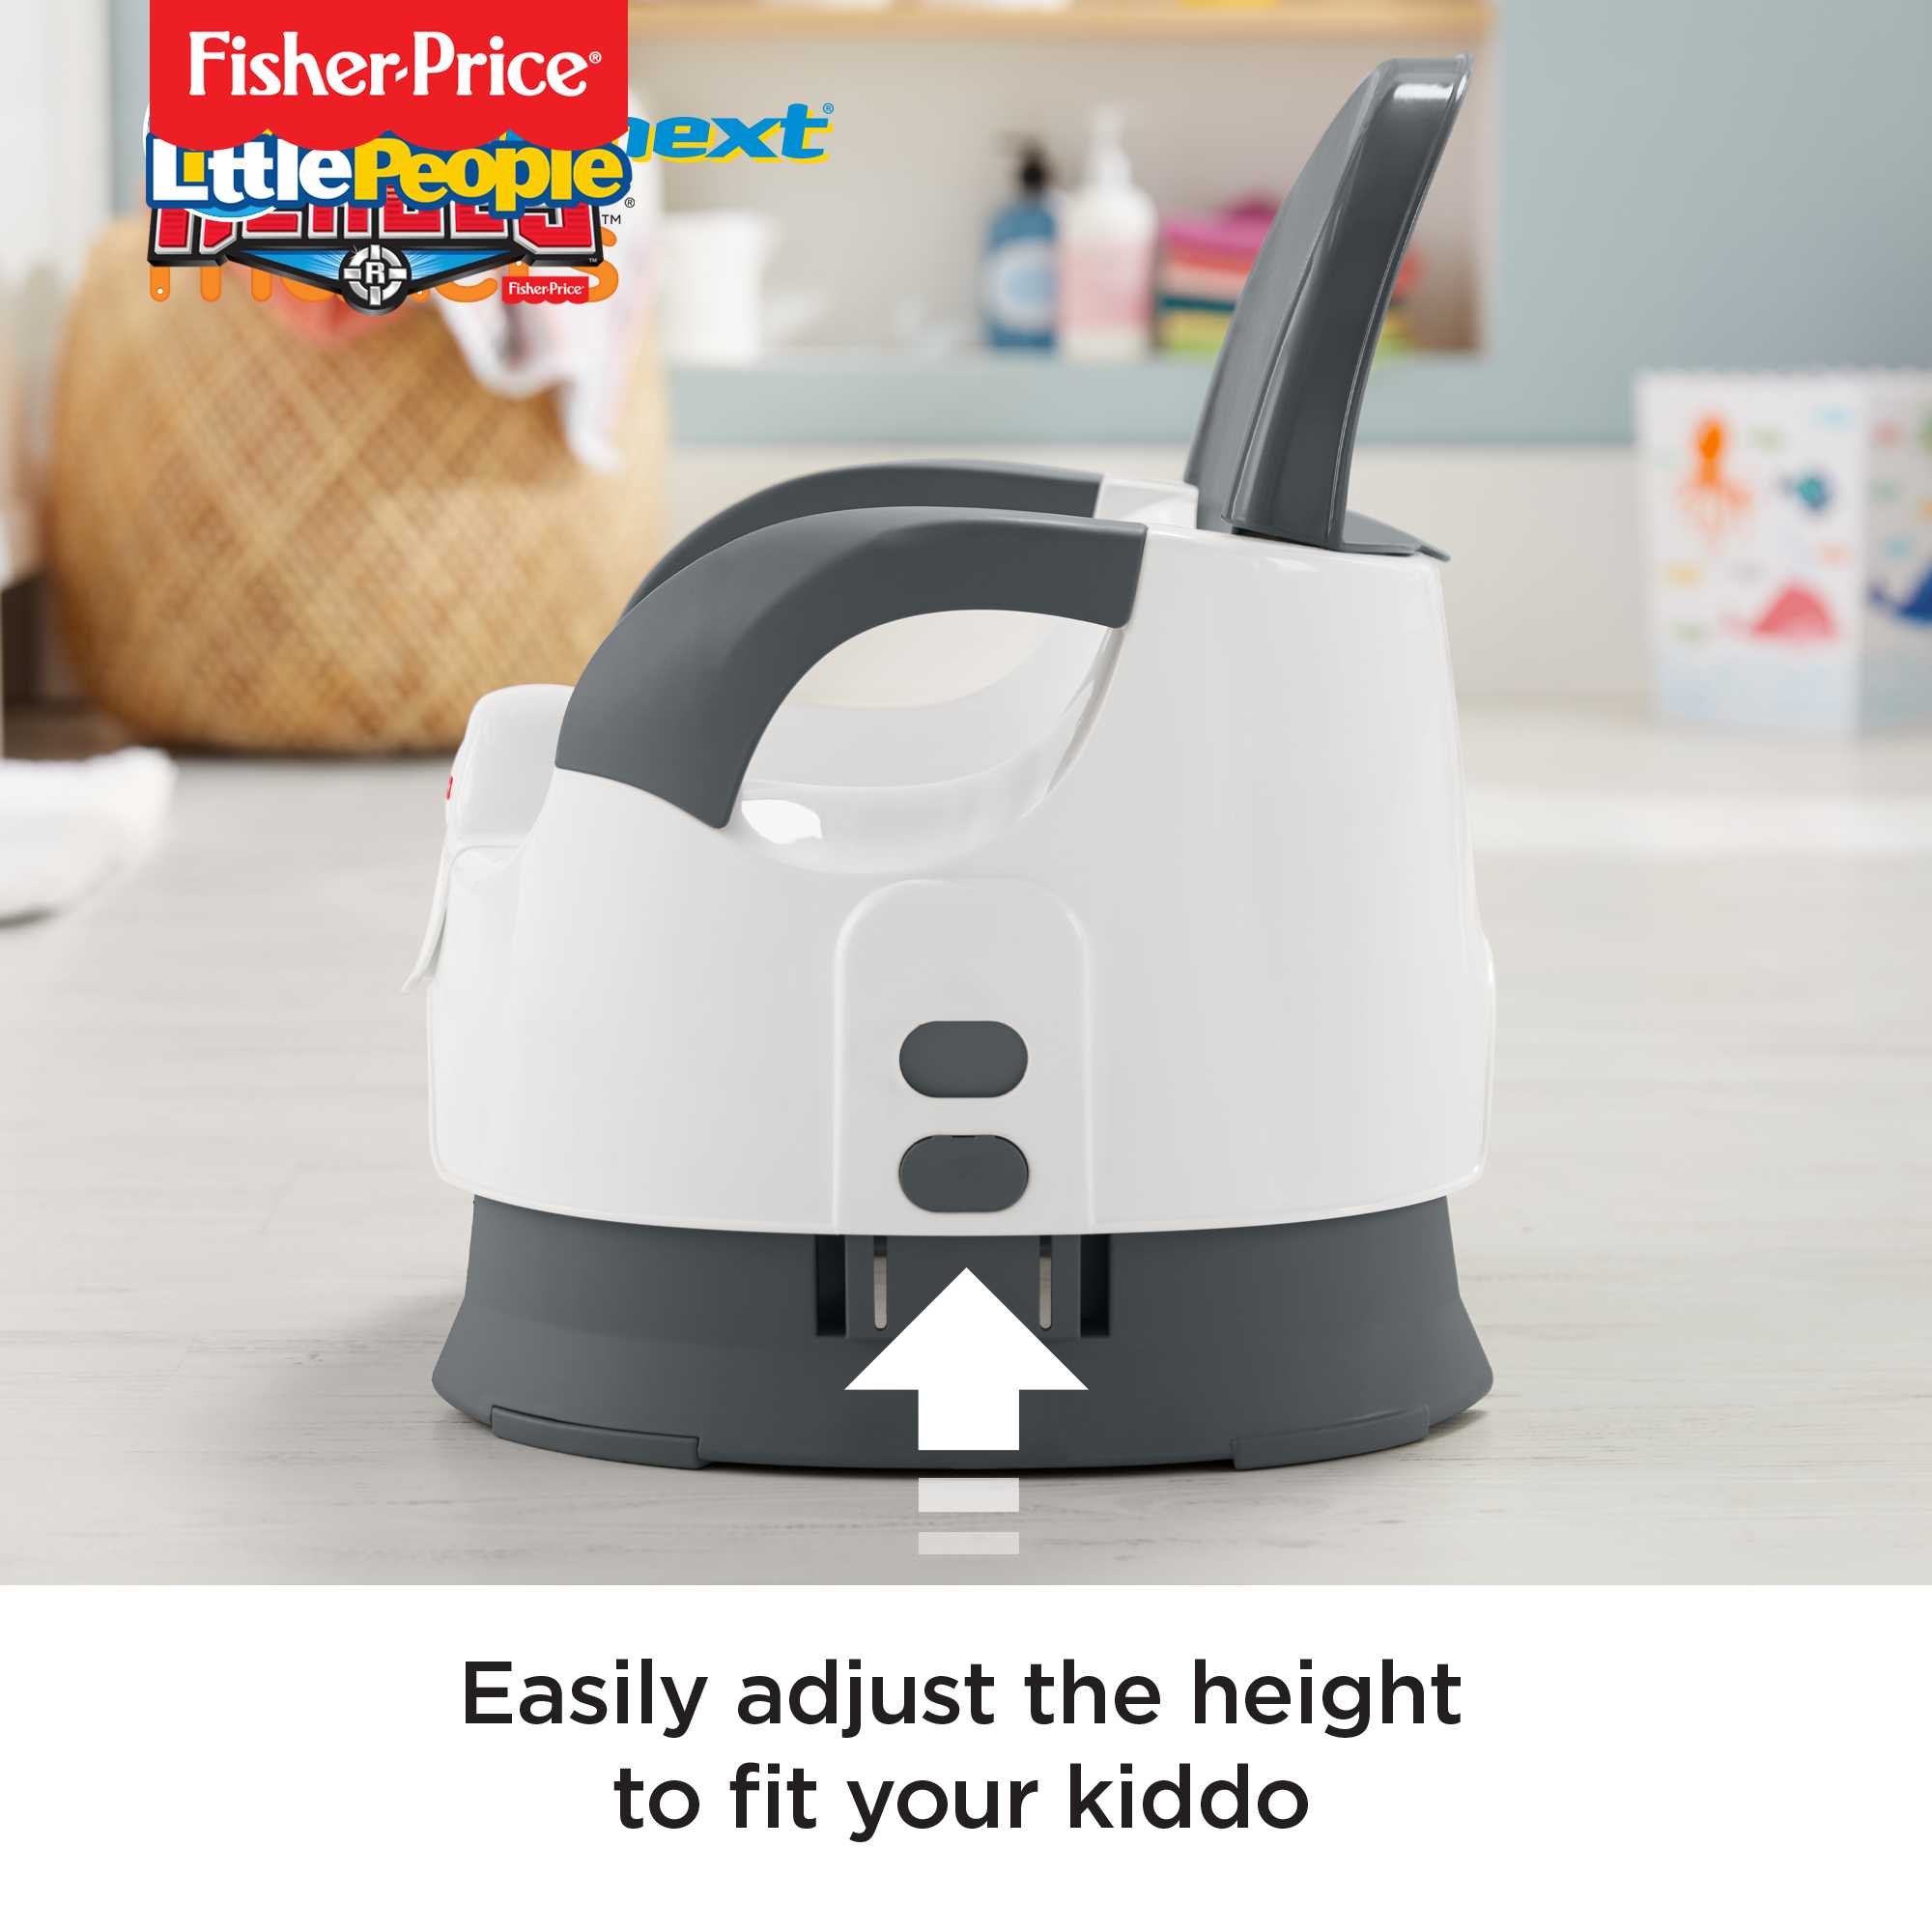 Fisher-Price Custom Comfort Potty Adjustable Toddler Training Toilet with Removable Bowl - image 5 of 7